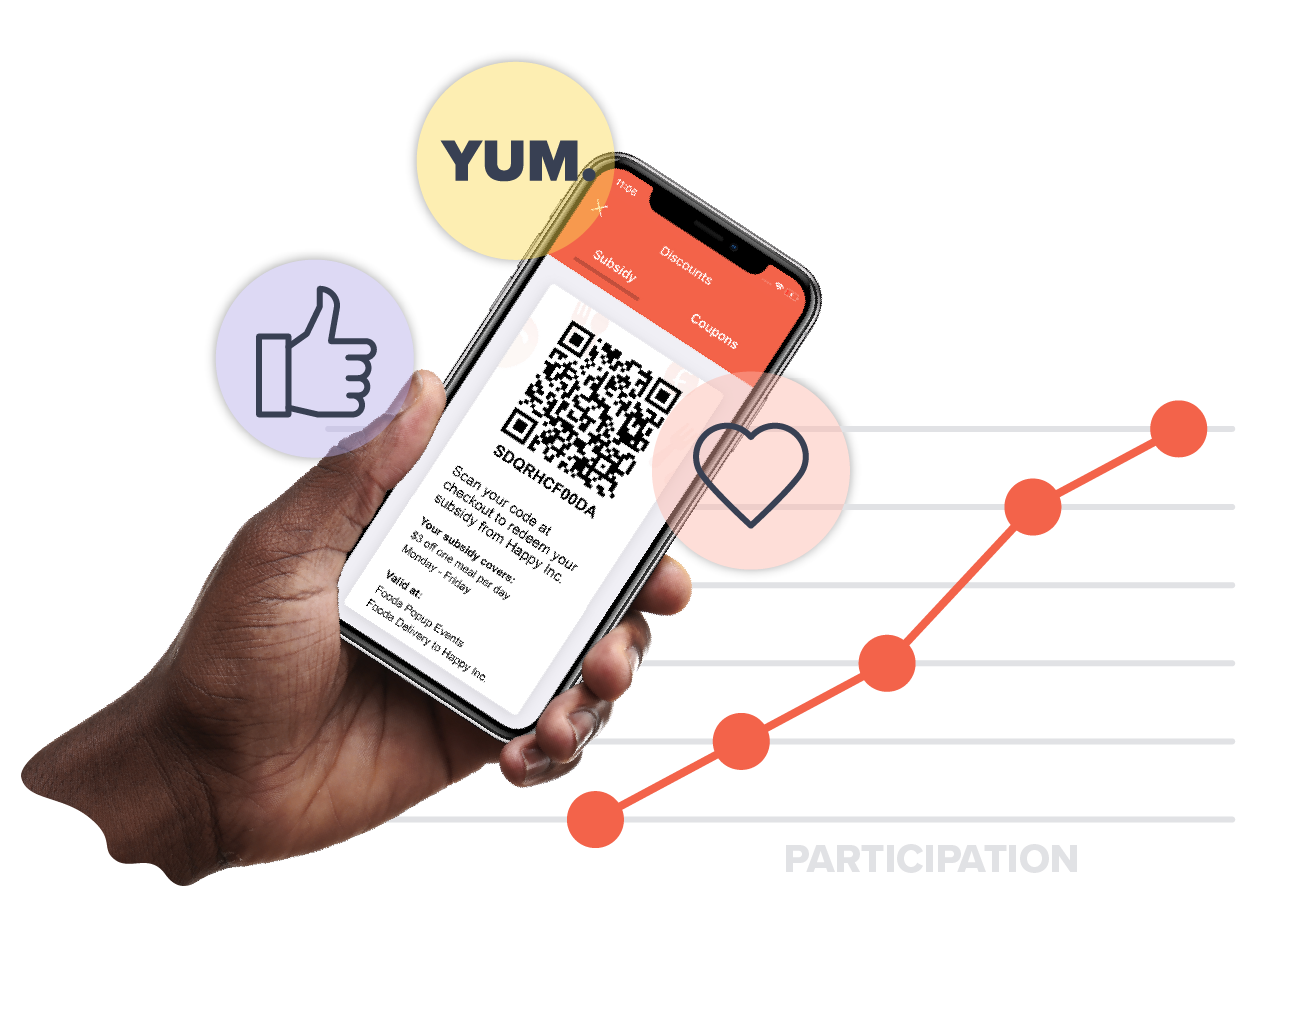 hand with phone using the Fooda app to redeem a subsidy, bubbles with a heart, thumbs up and Yum. in them, and a graph showing participation increasing